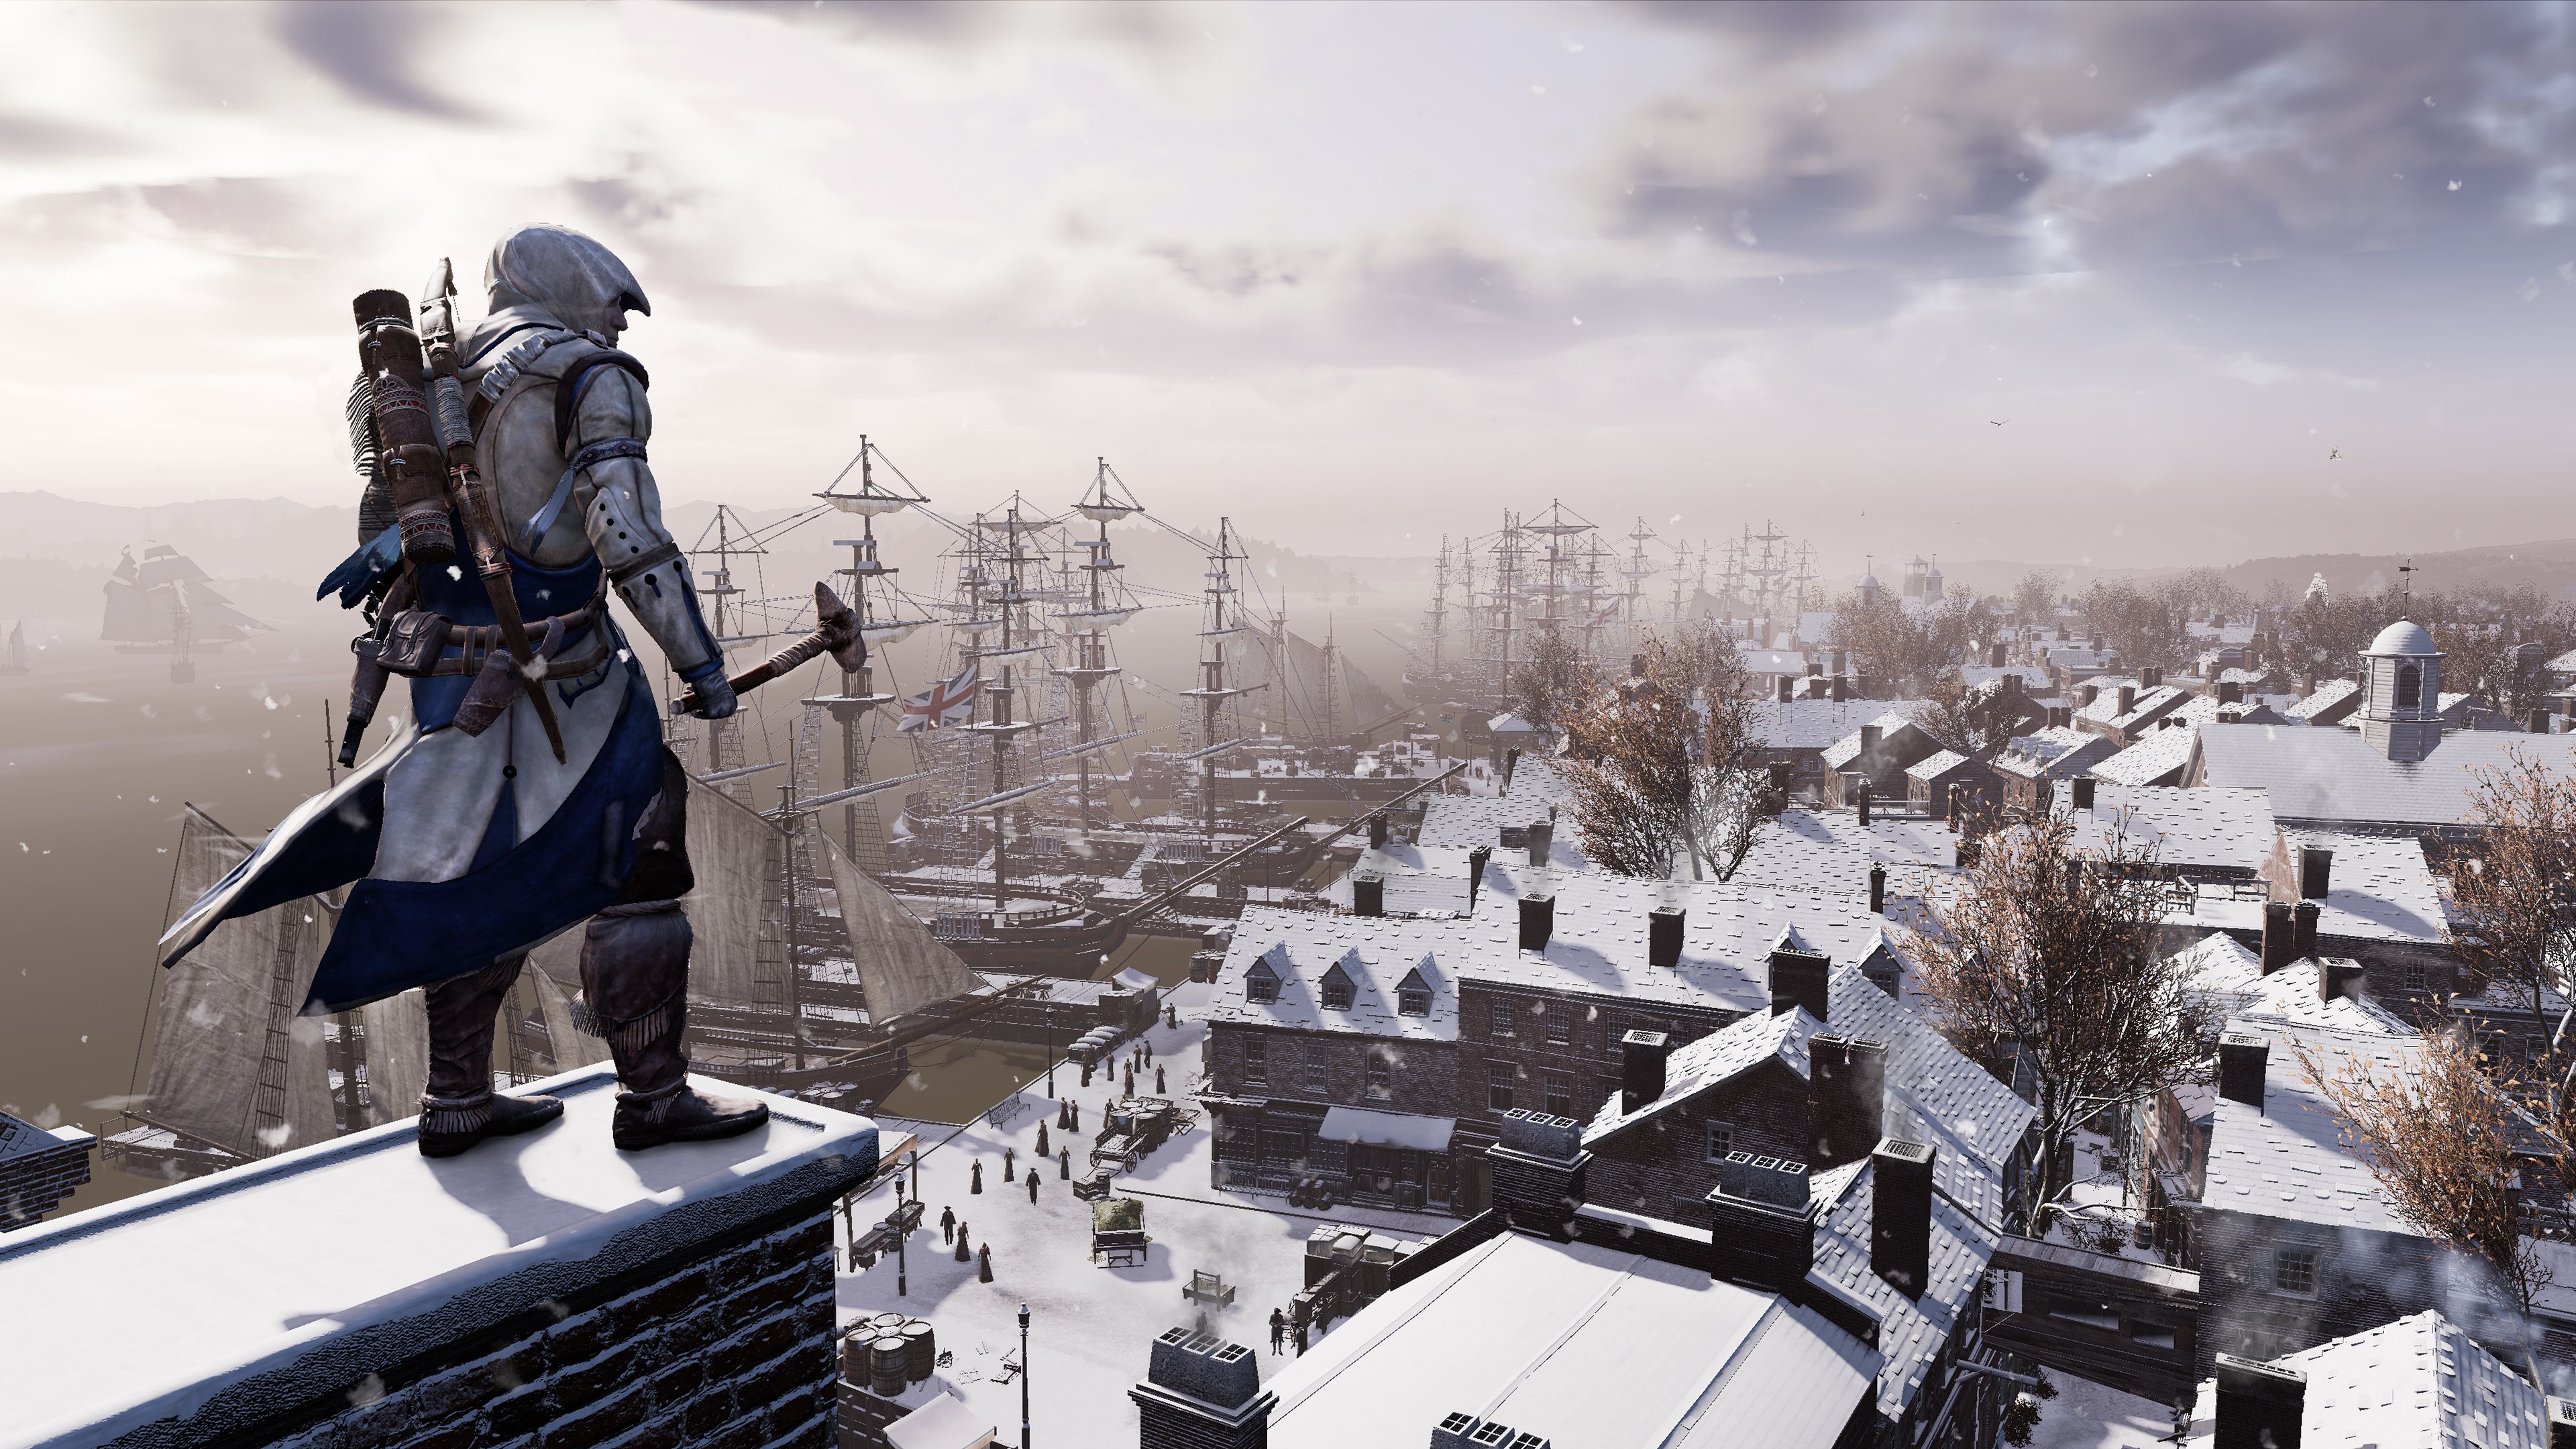 Connor Kenway 4k Ultra HD Wallpaper. Background Imagex2160